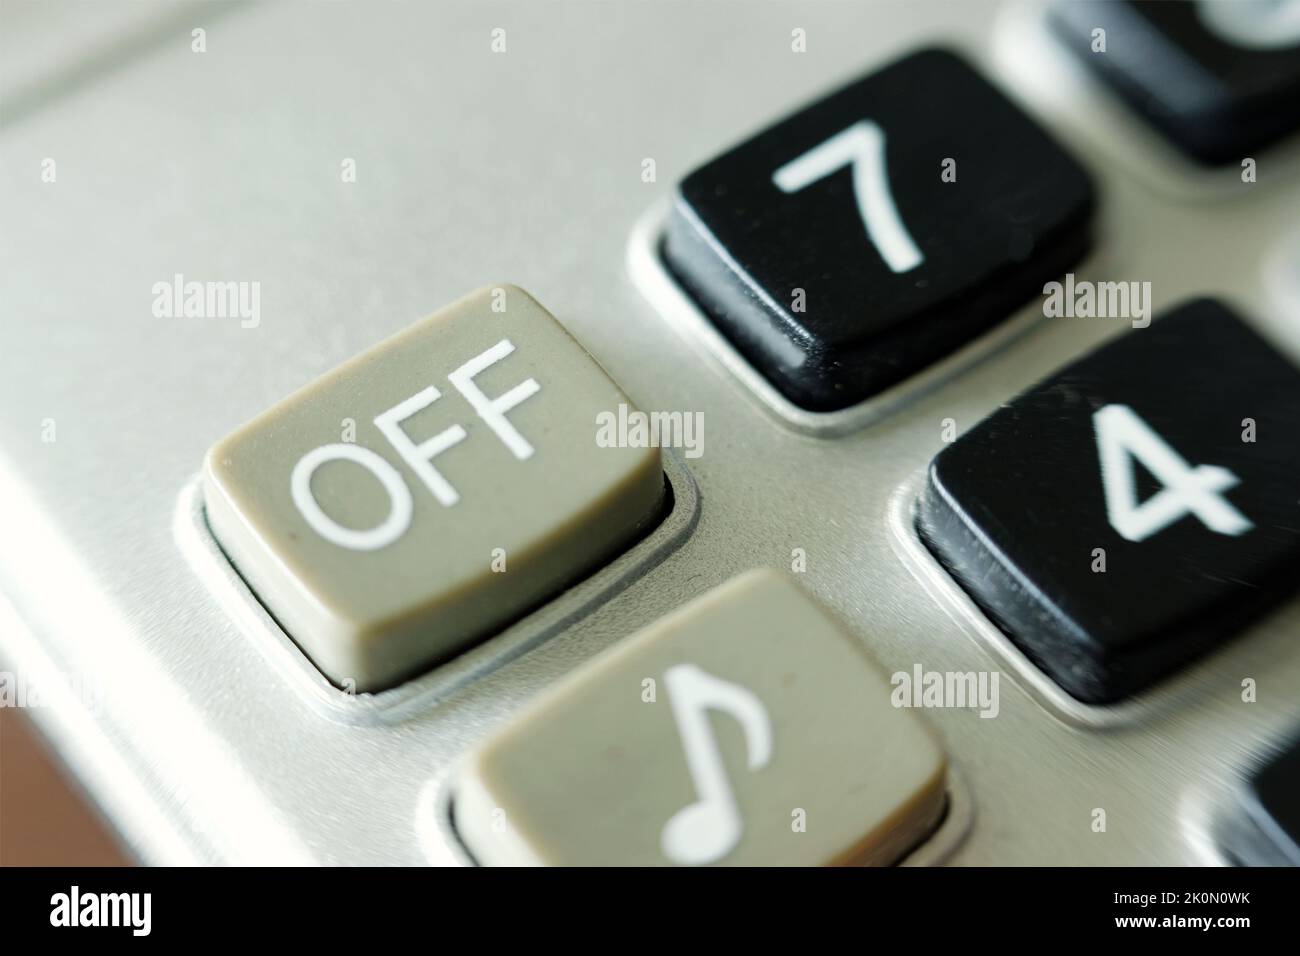 'close up of off' button on a calculator Stock Photo